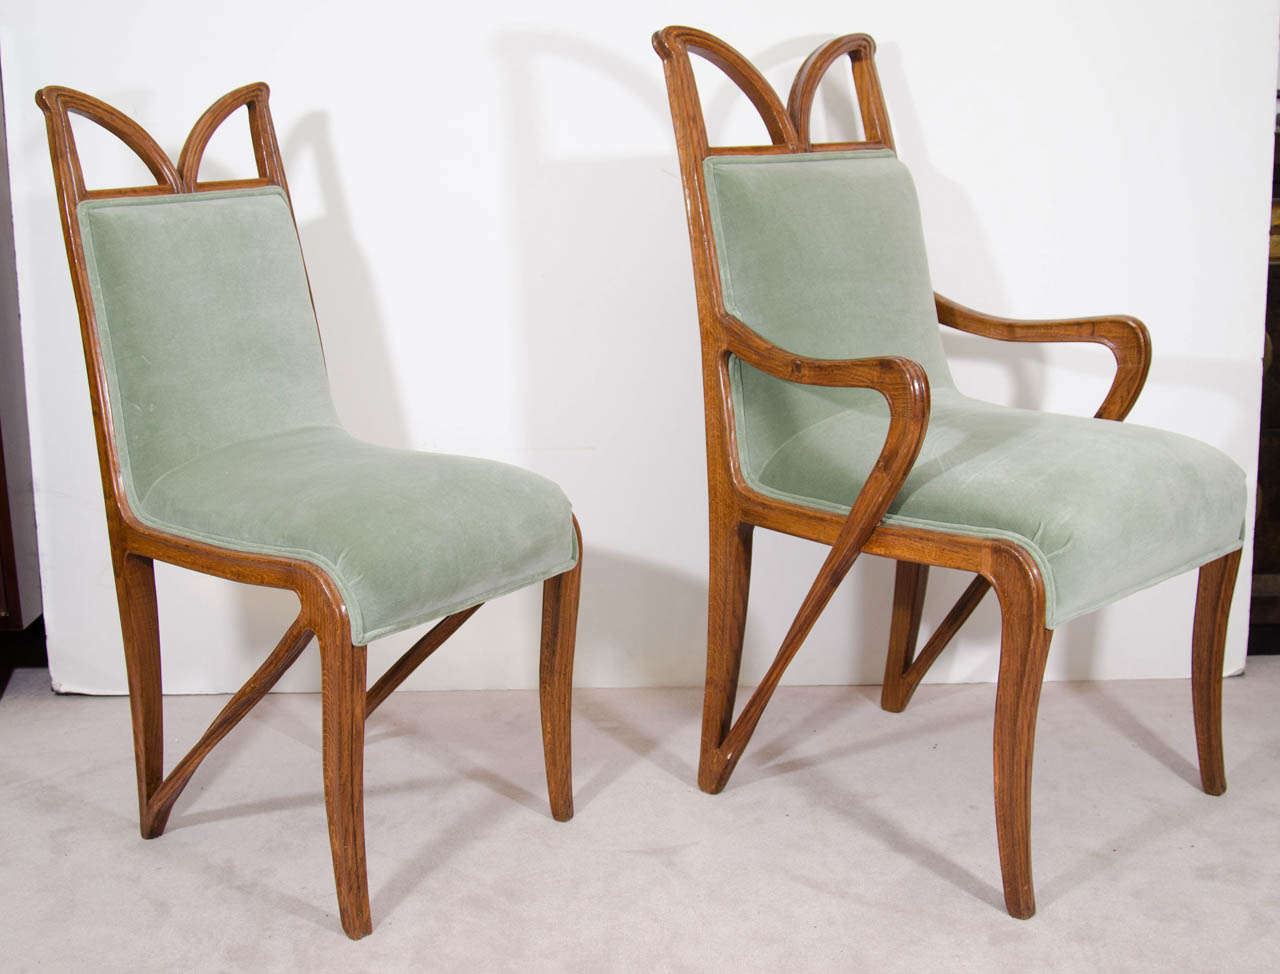 A French vintage set of four early 20th century chairs, including two armchairs and two side chairs, designed in the Art Nouveau mode, each upholstered in green velvet, against beautifully carved wood frames. 